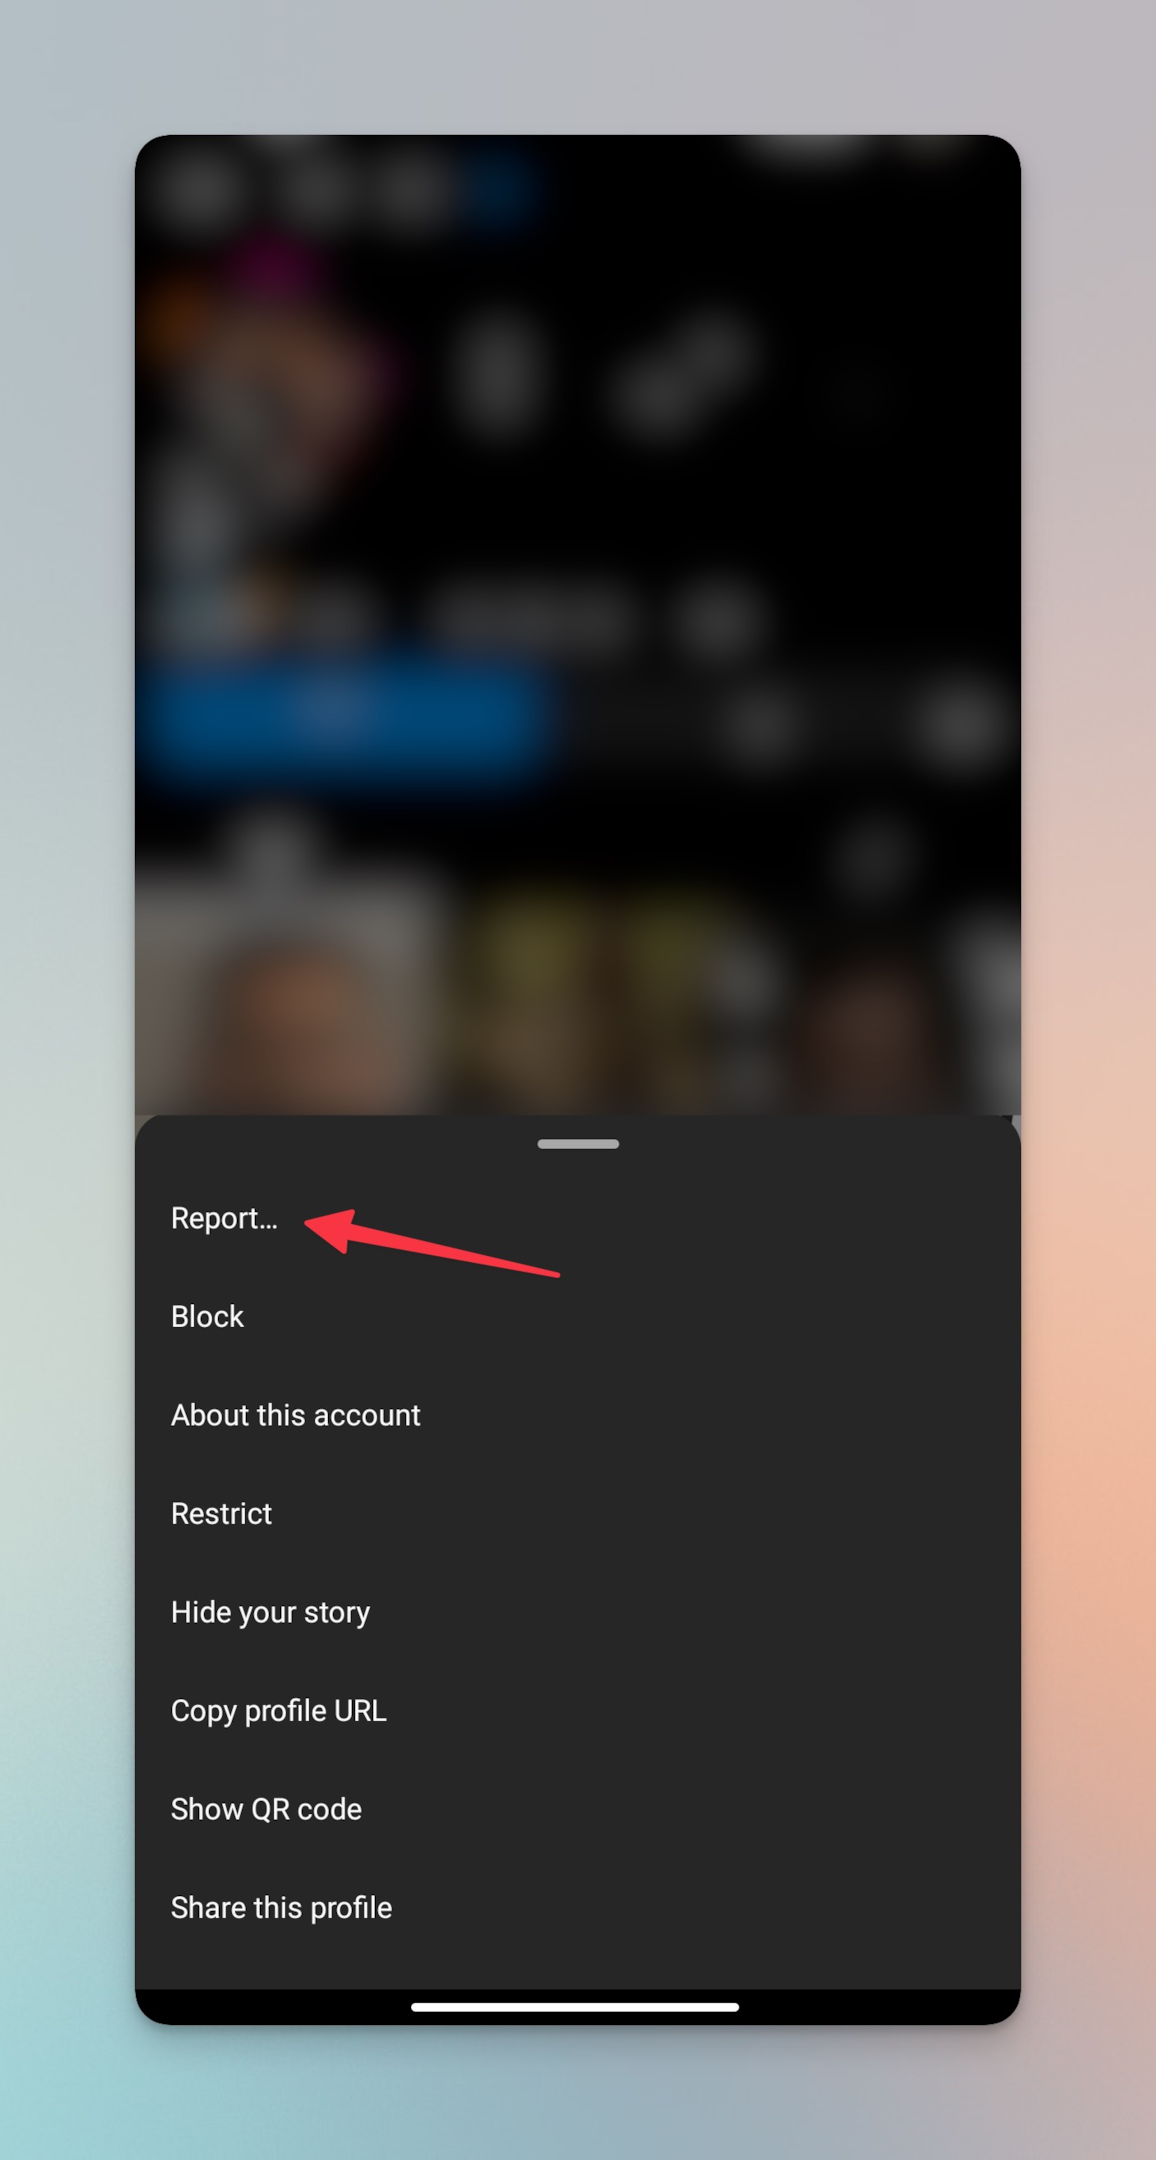 Remote.tools pointing to Report option on Instagram app for android to report an account